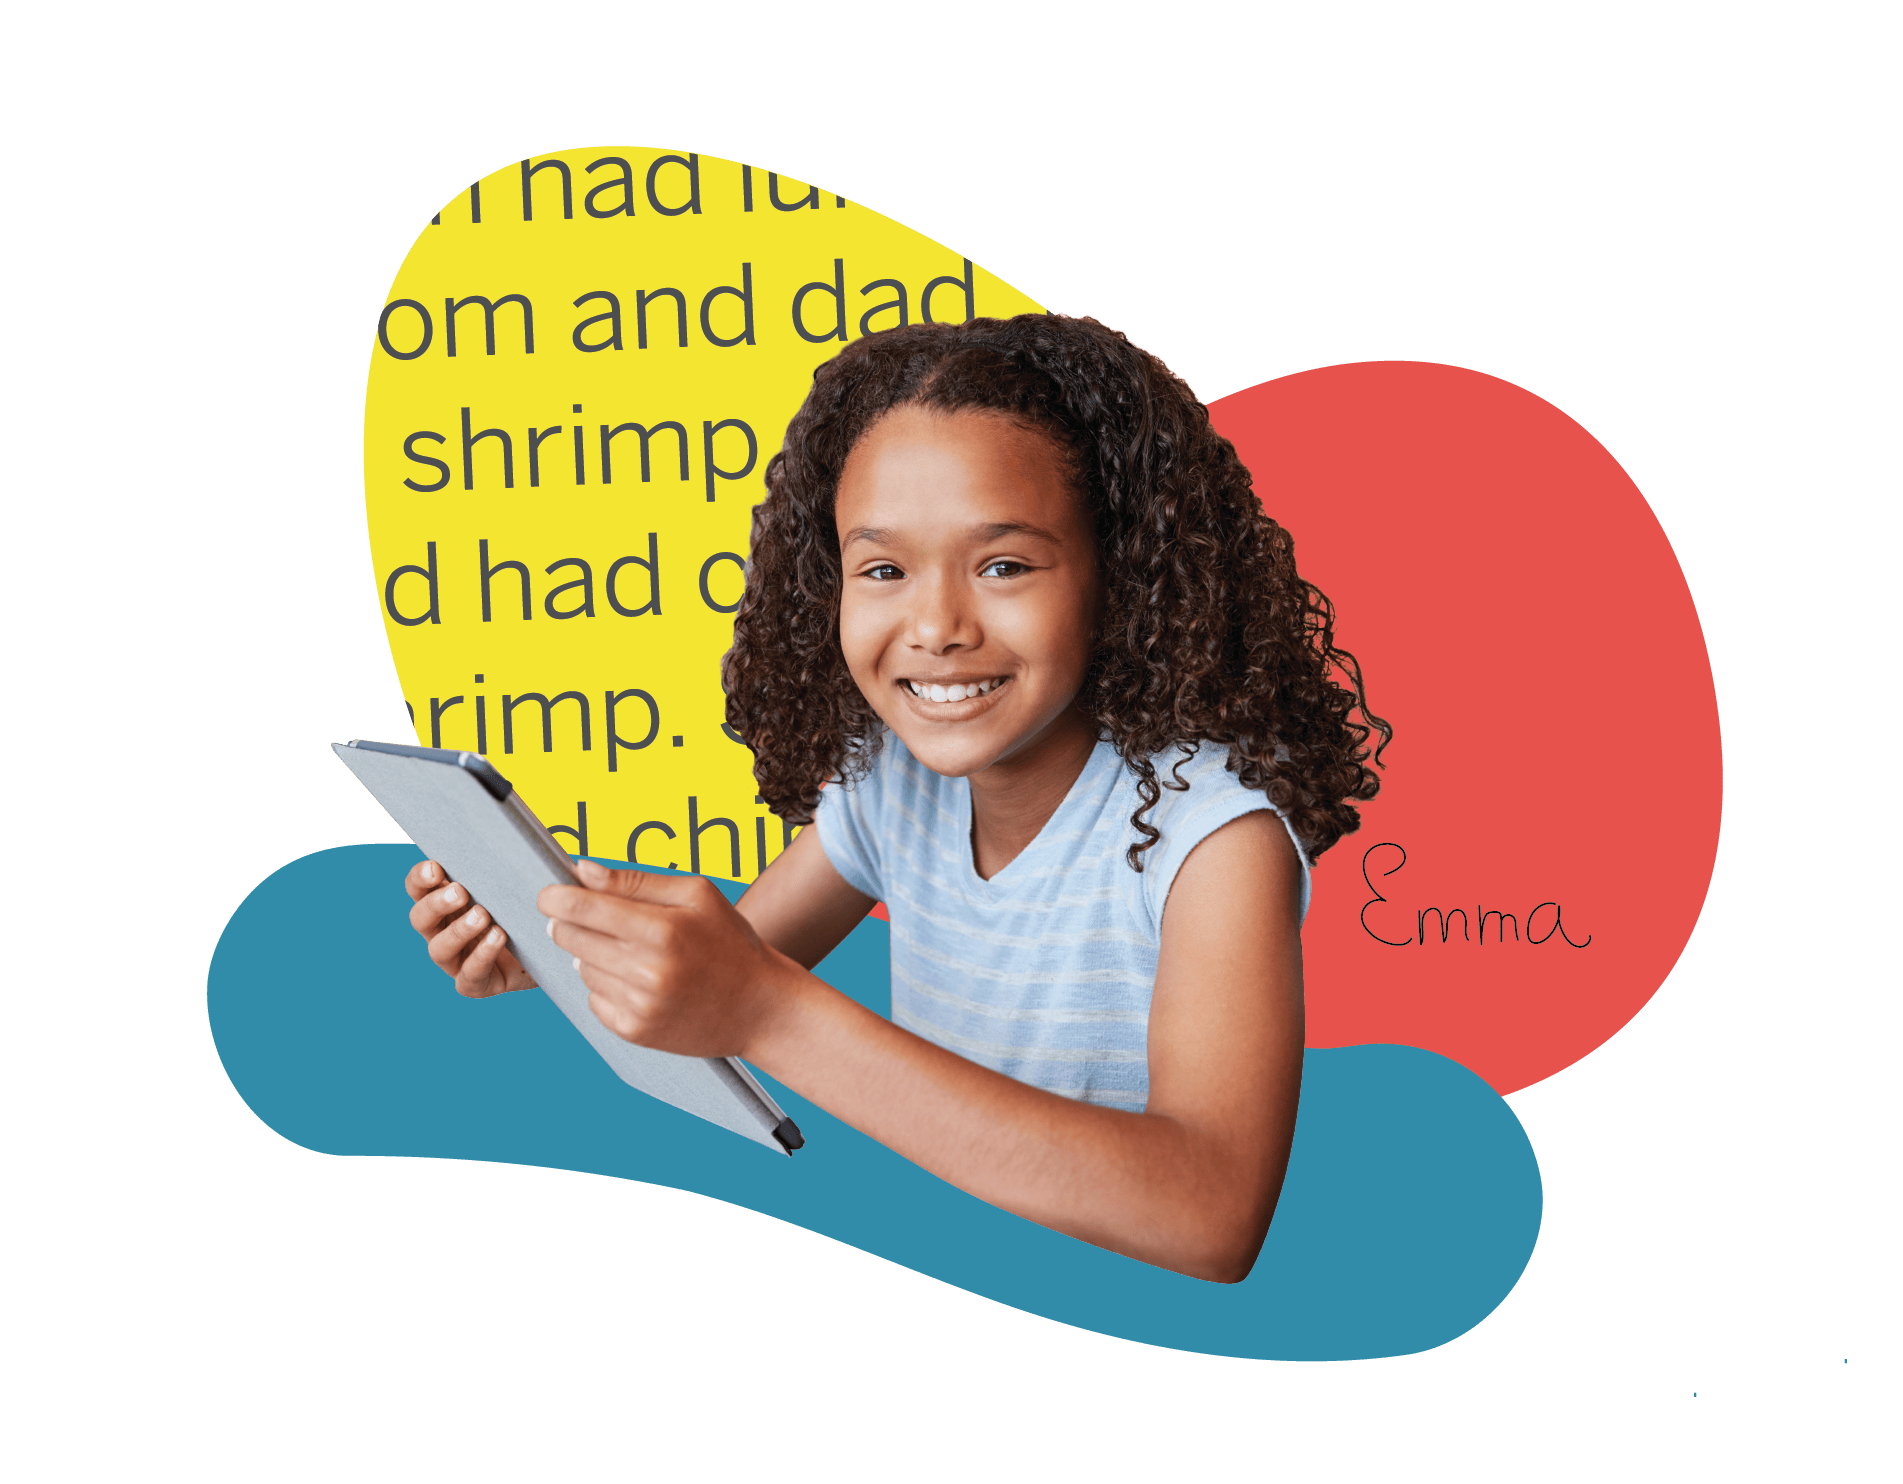 A young girl with curly hair smiles while holding a stylus and a digital tablet, sitting in front of colorful abstract shapes.